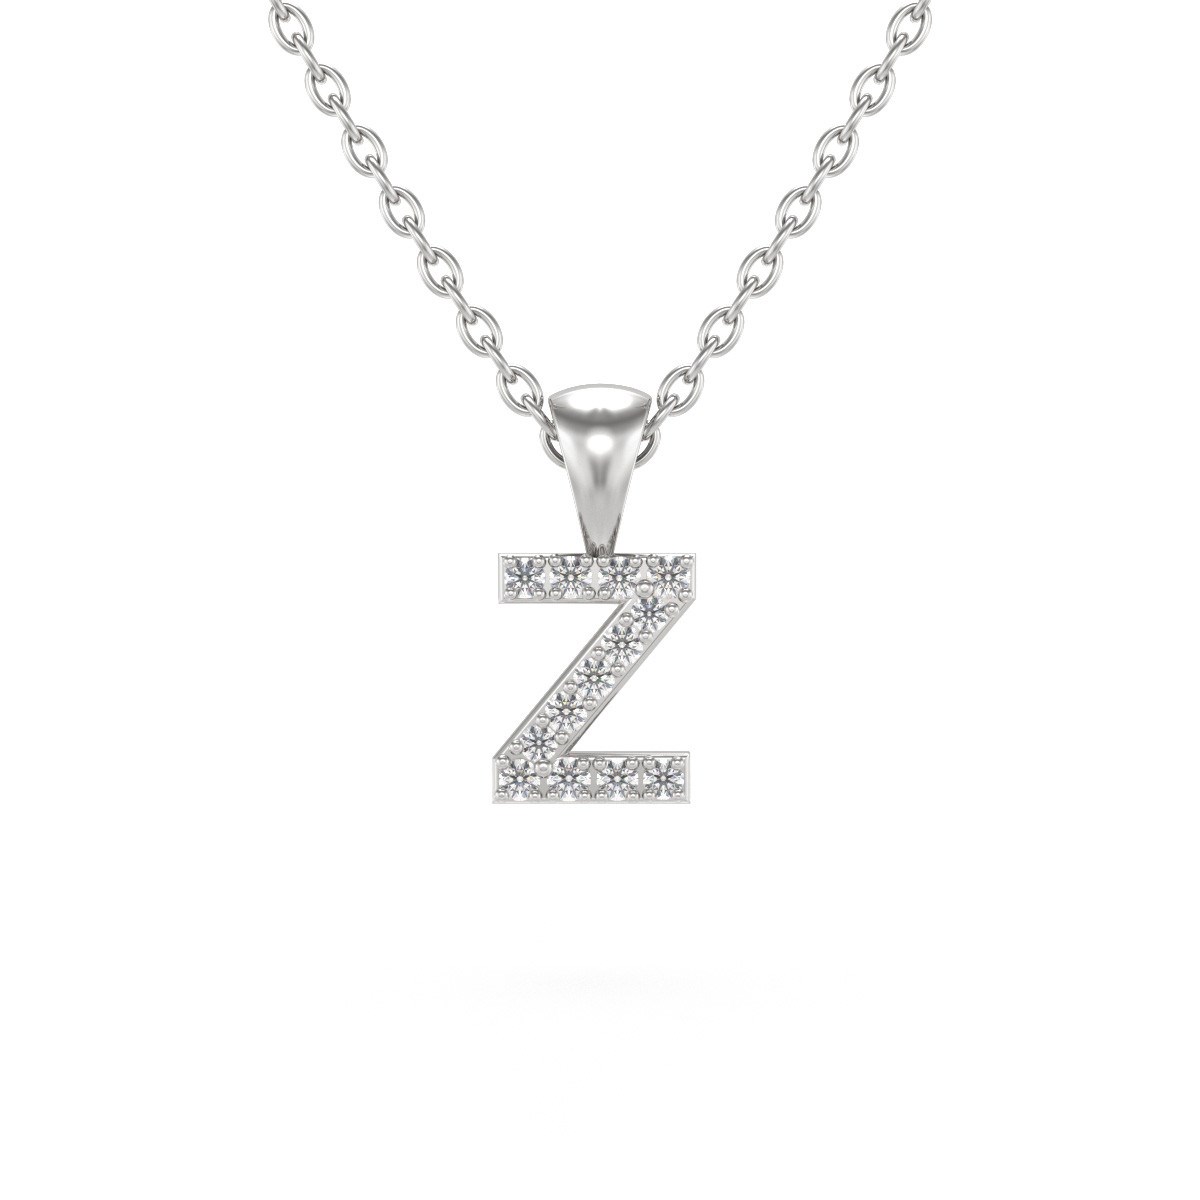 Collier Pendentif ADEN Lettre Z Or 750 Blanc Diamant Chaine Or 750 incluse 0.72grs